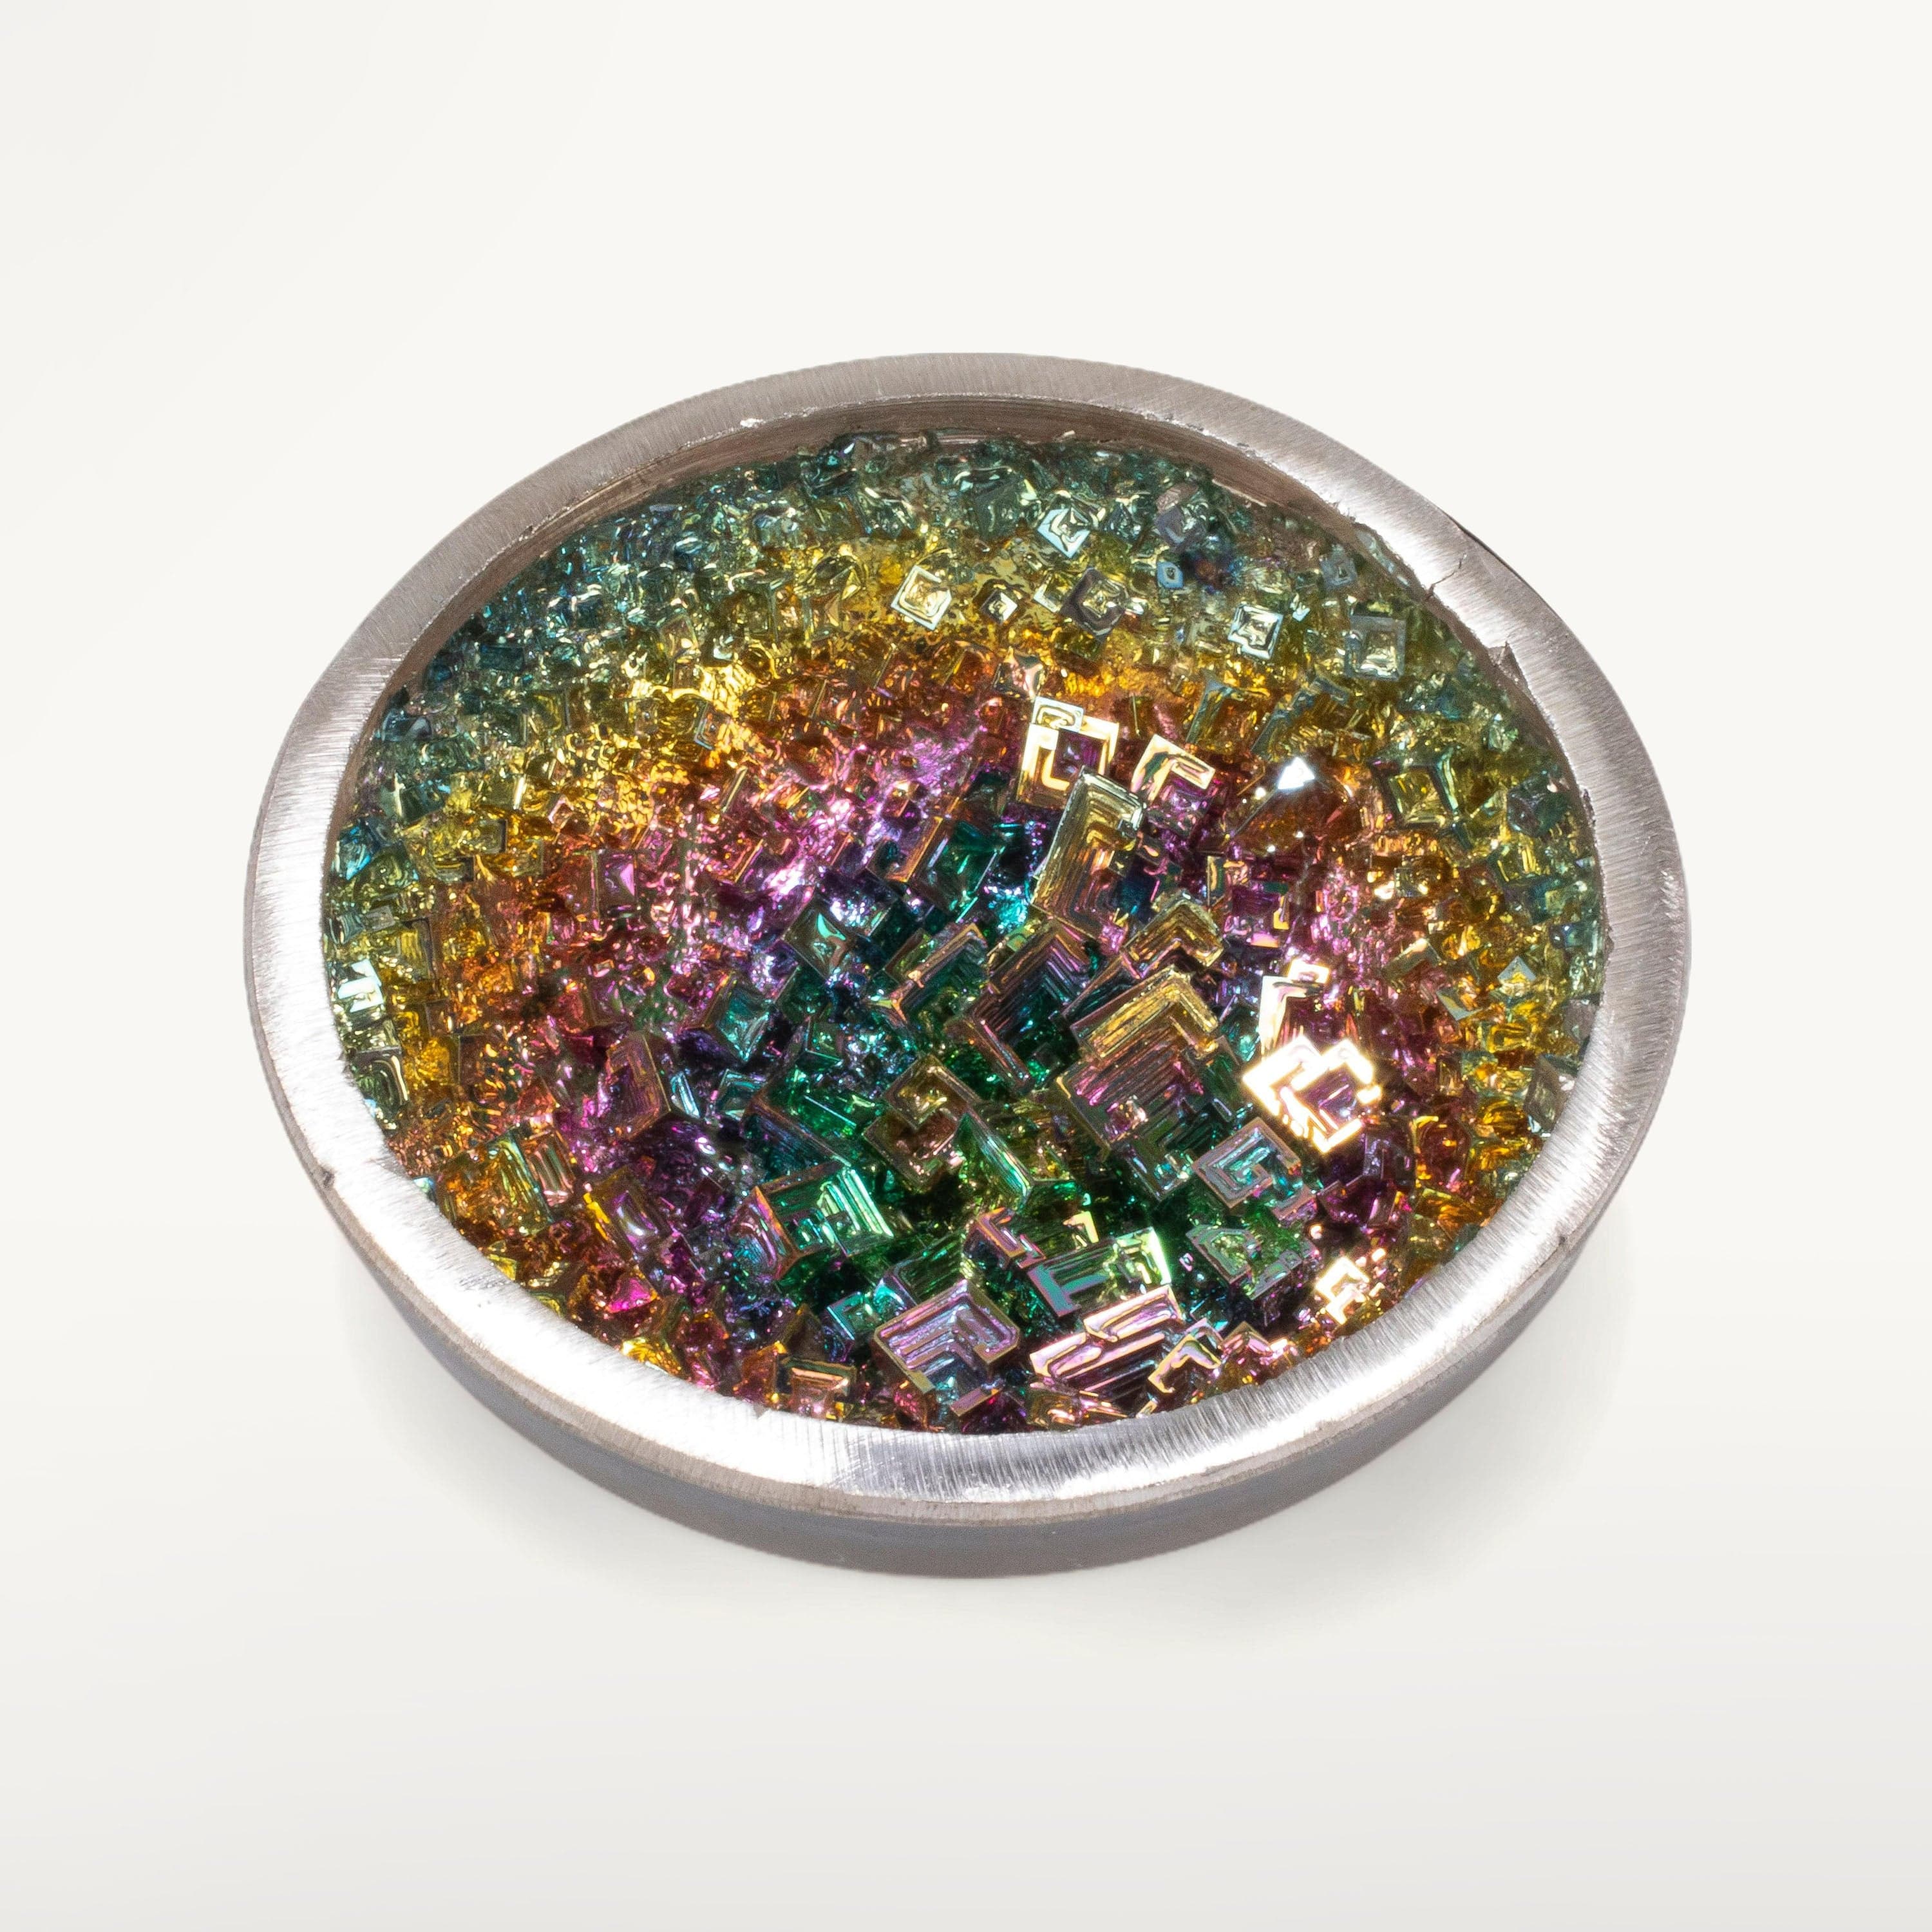 KALIFANO TUMBLED STONES Bismuth Ore Bowl - 4.5" BISMUTH-B